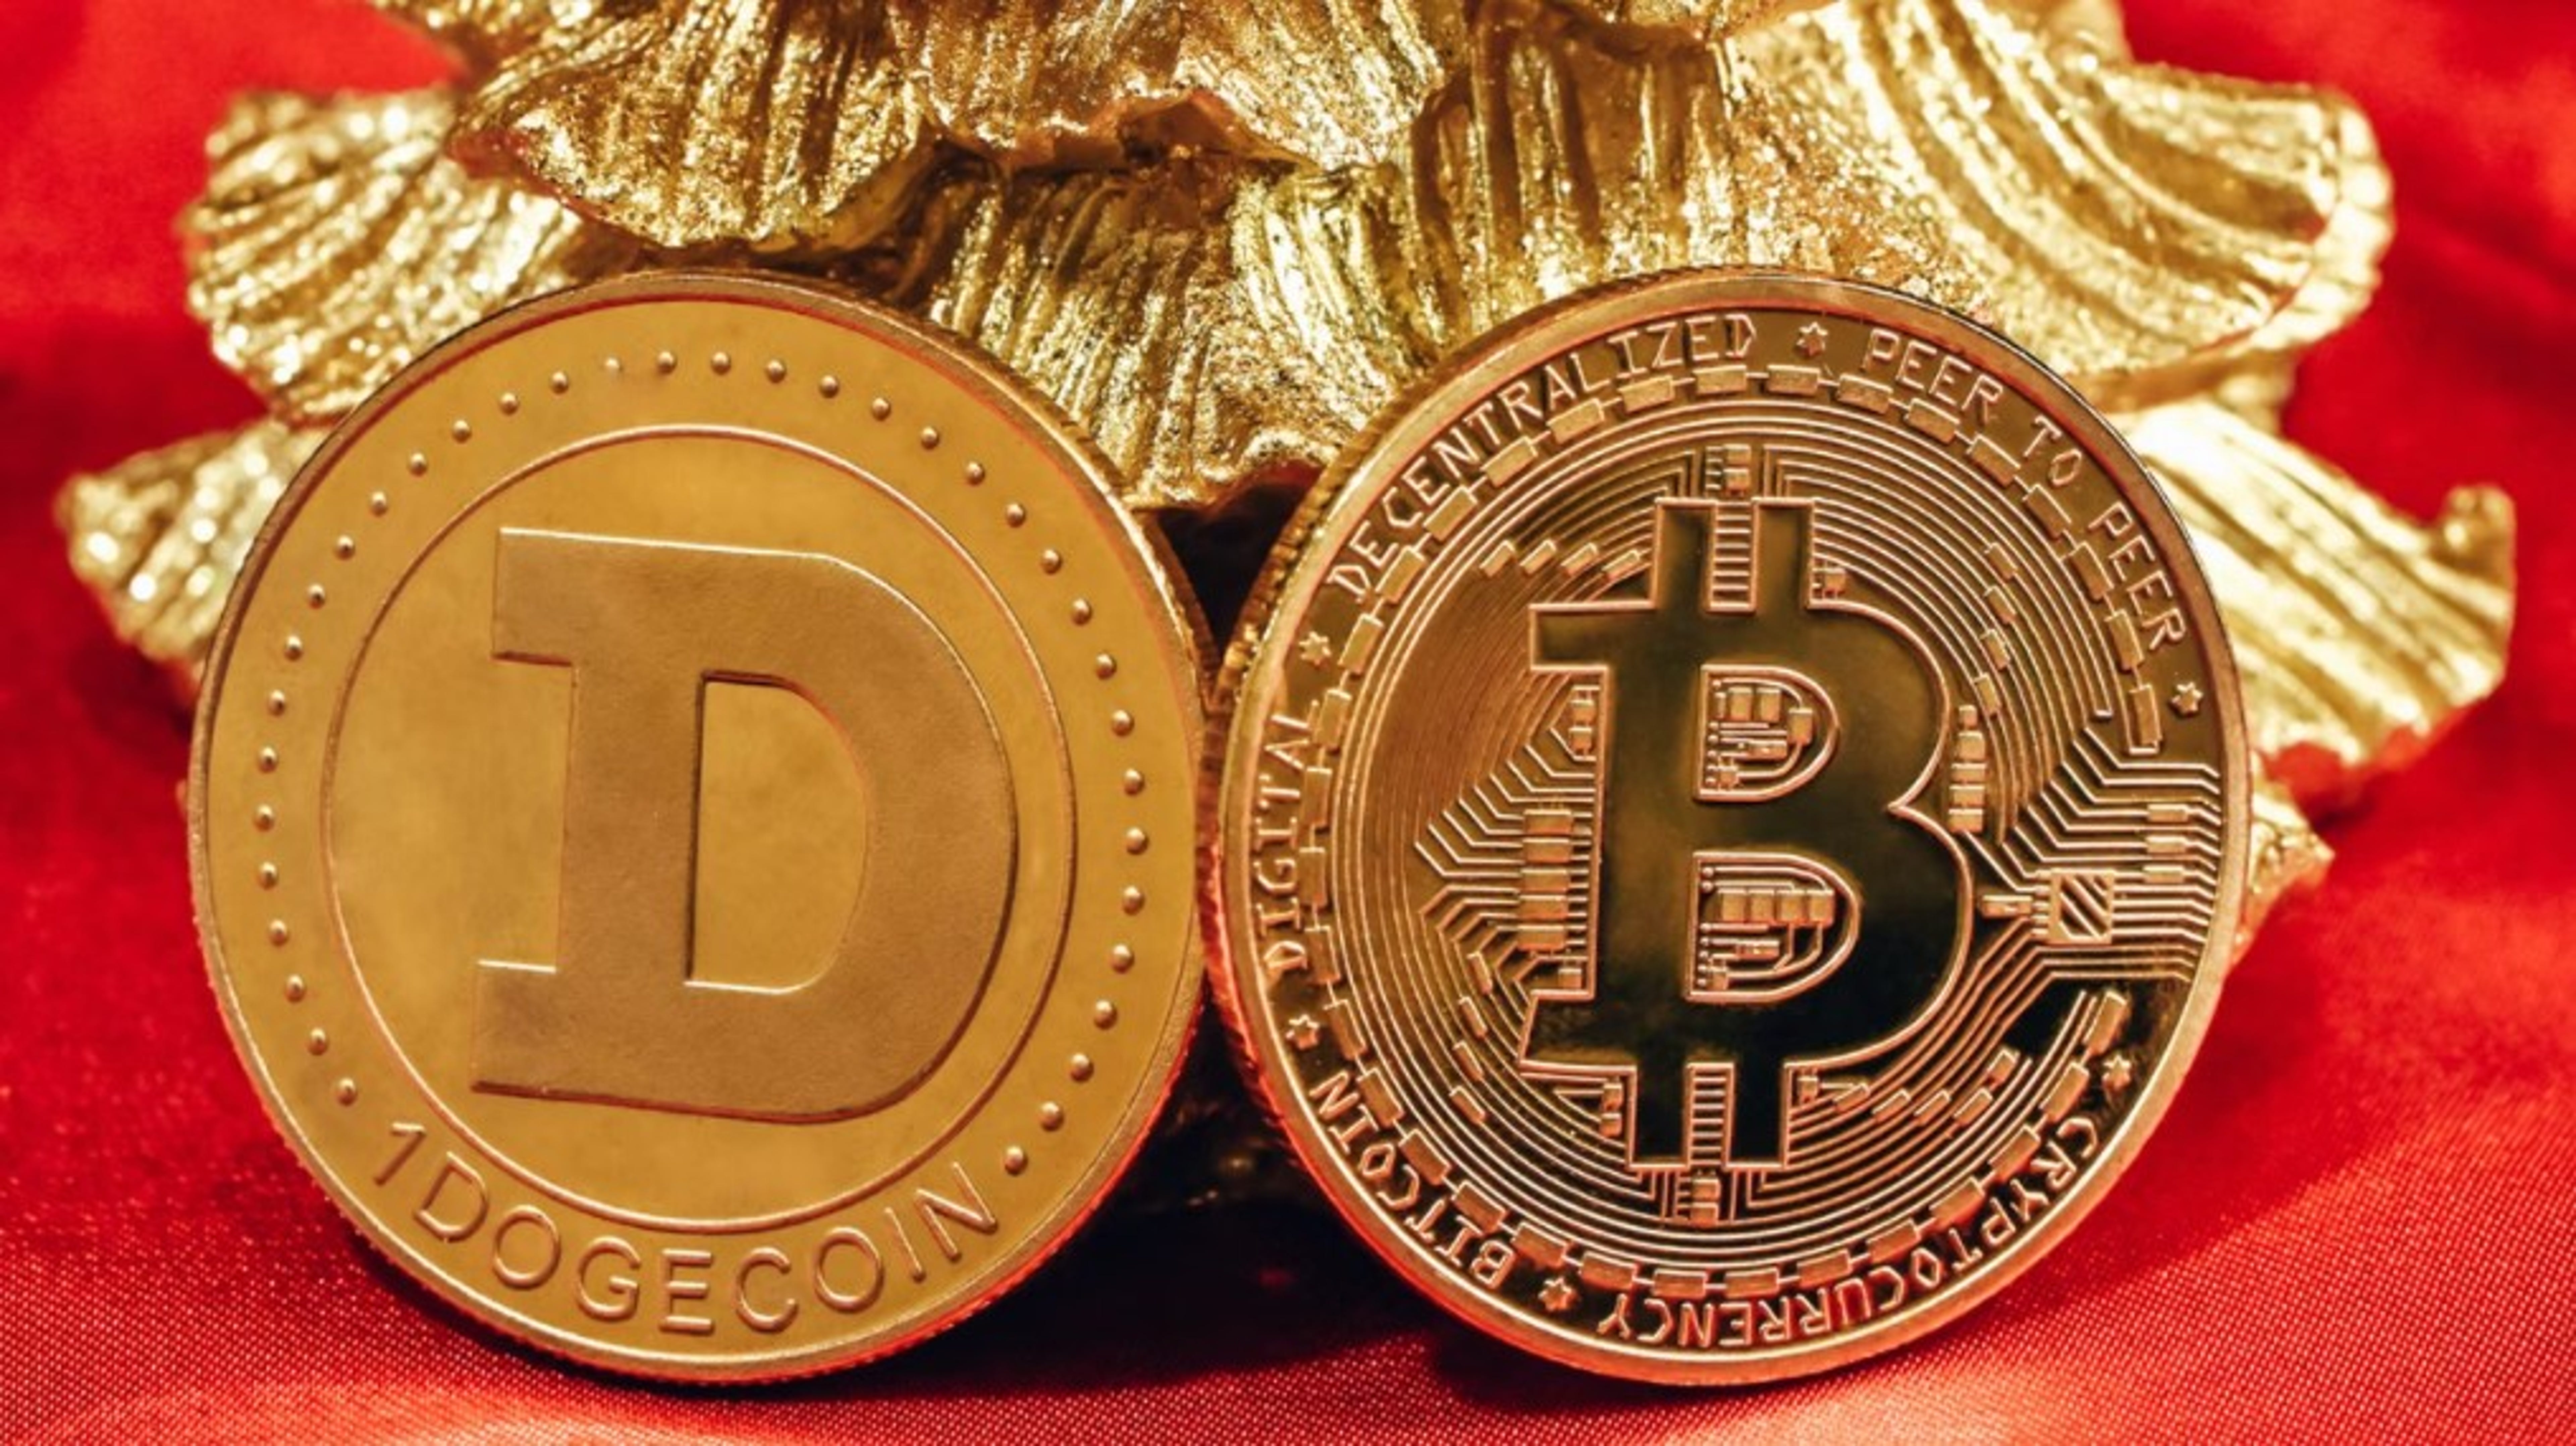 Which Will Happen First, Bitcoin At $100K Or Dogecoin At $1? The Choice Is Clear